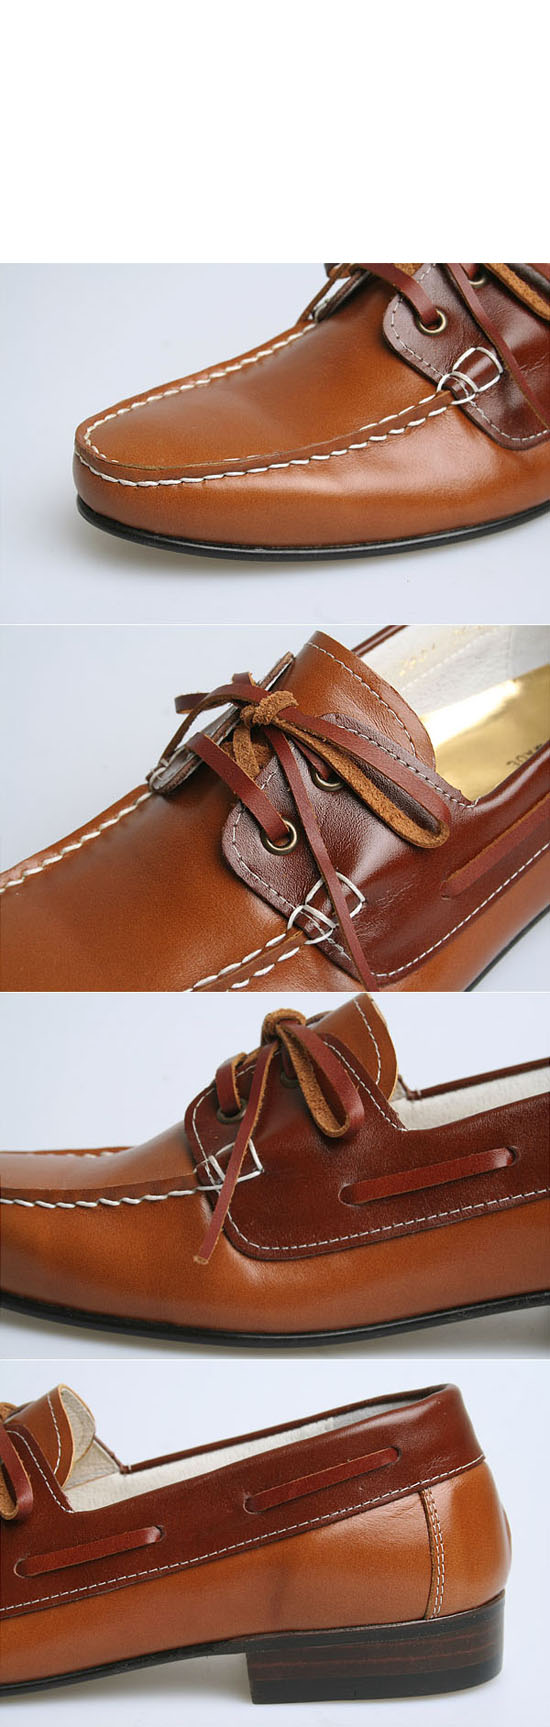 Shoes :: Classic Leather Penny Loafer-Shoes 40 - GUYLOOK Men's Trendy ...